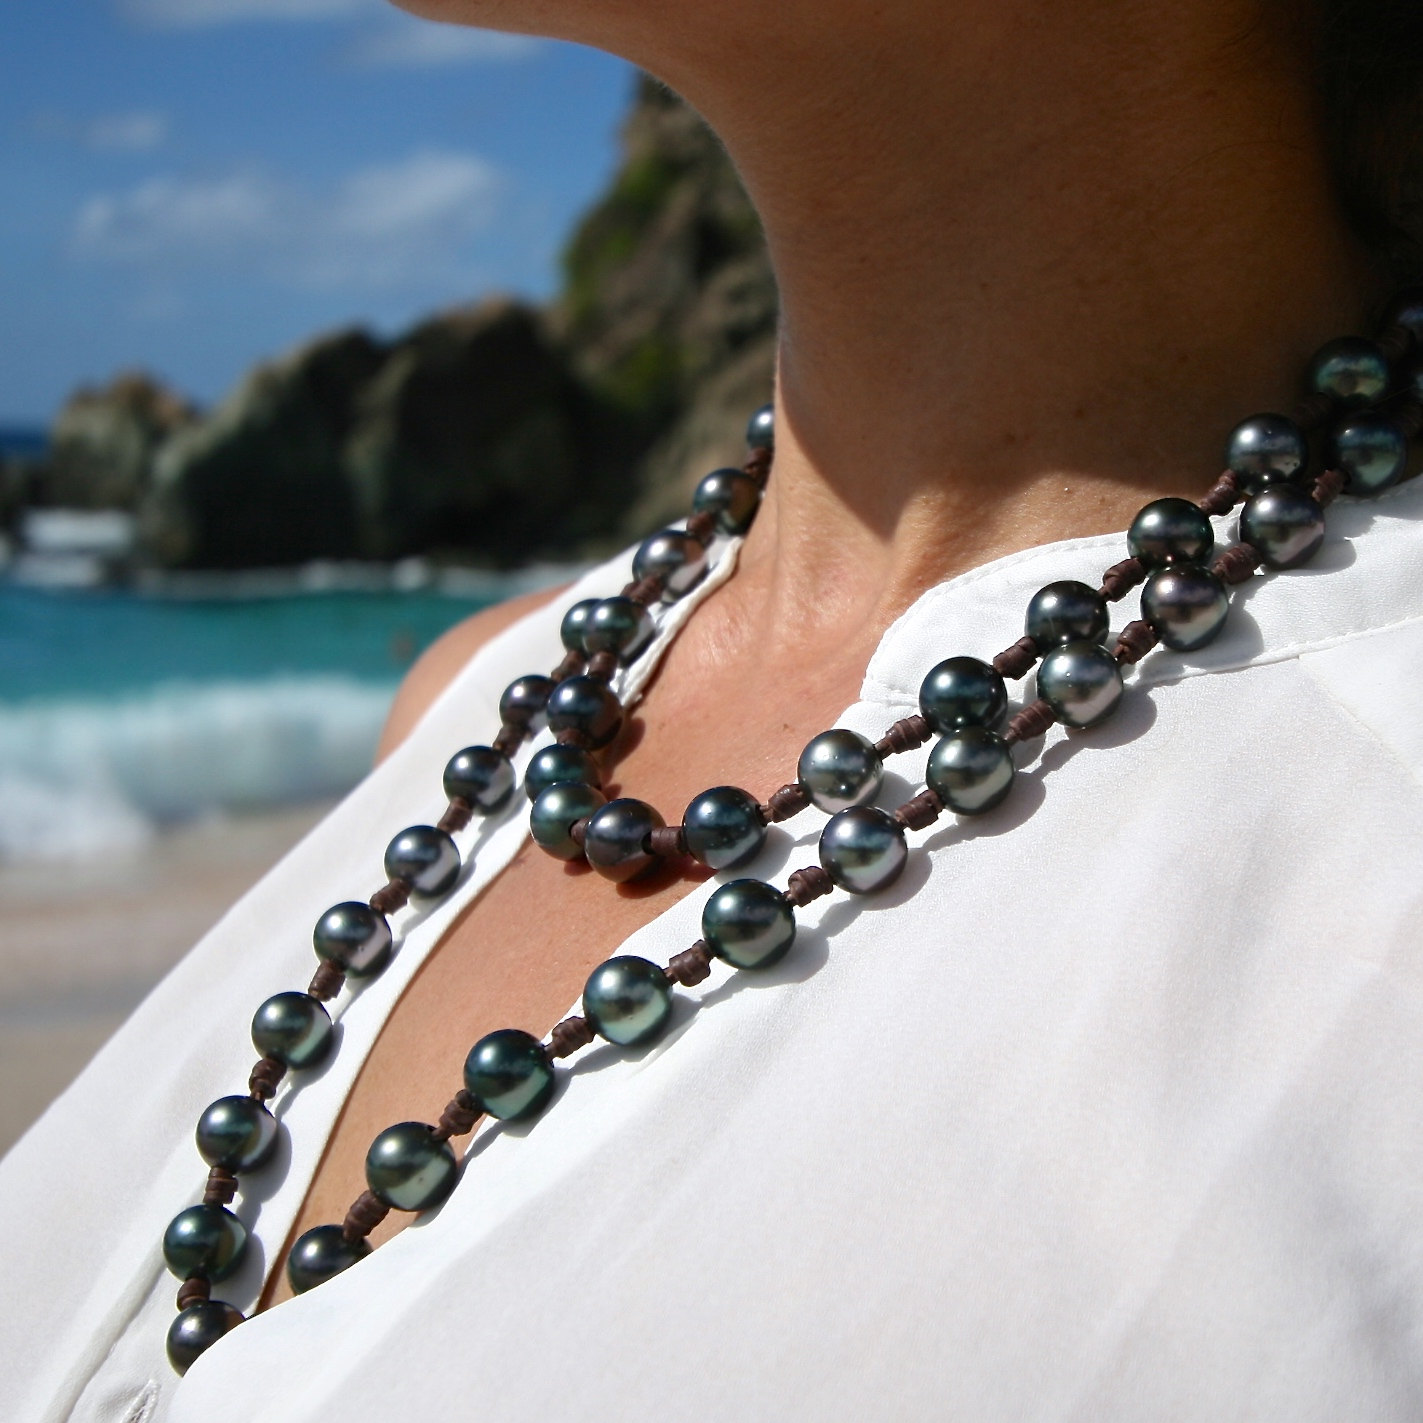 Long pearl necklace on leather, Tahitian leathered pearls, genuine cultured black or Gray pearls on leather, mermaid beach summer jewelry.